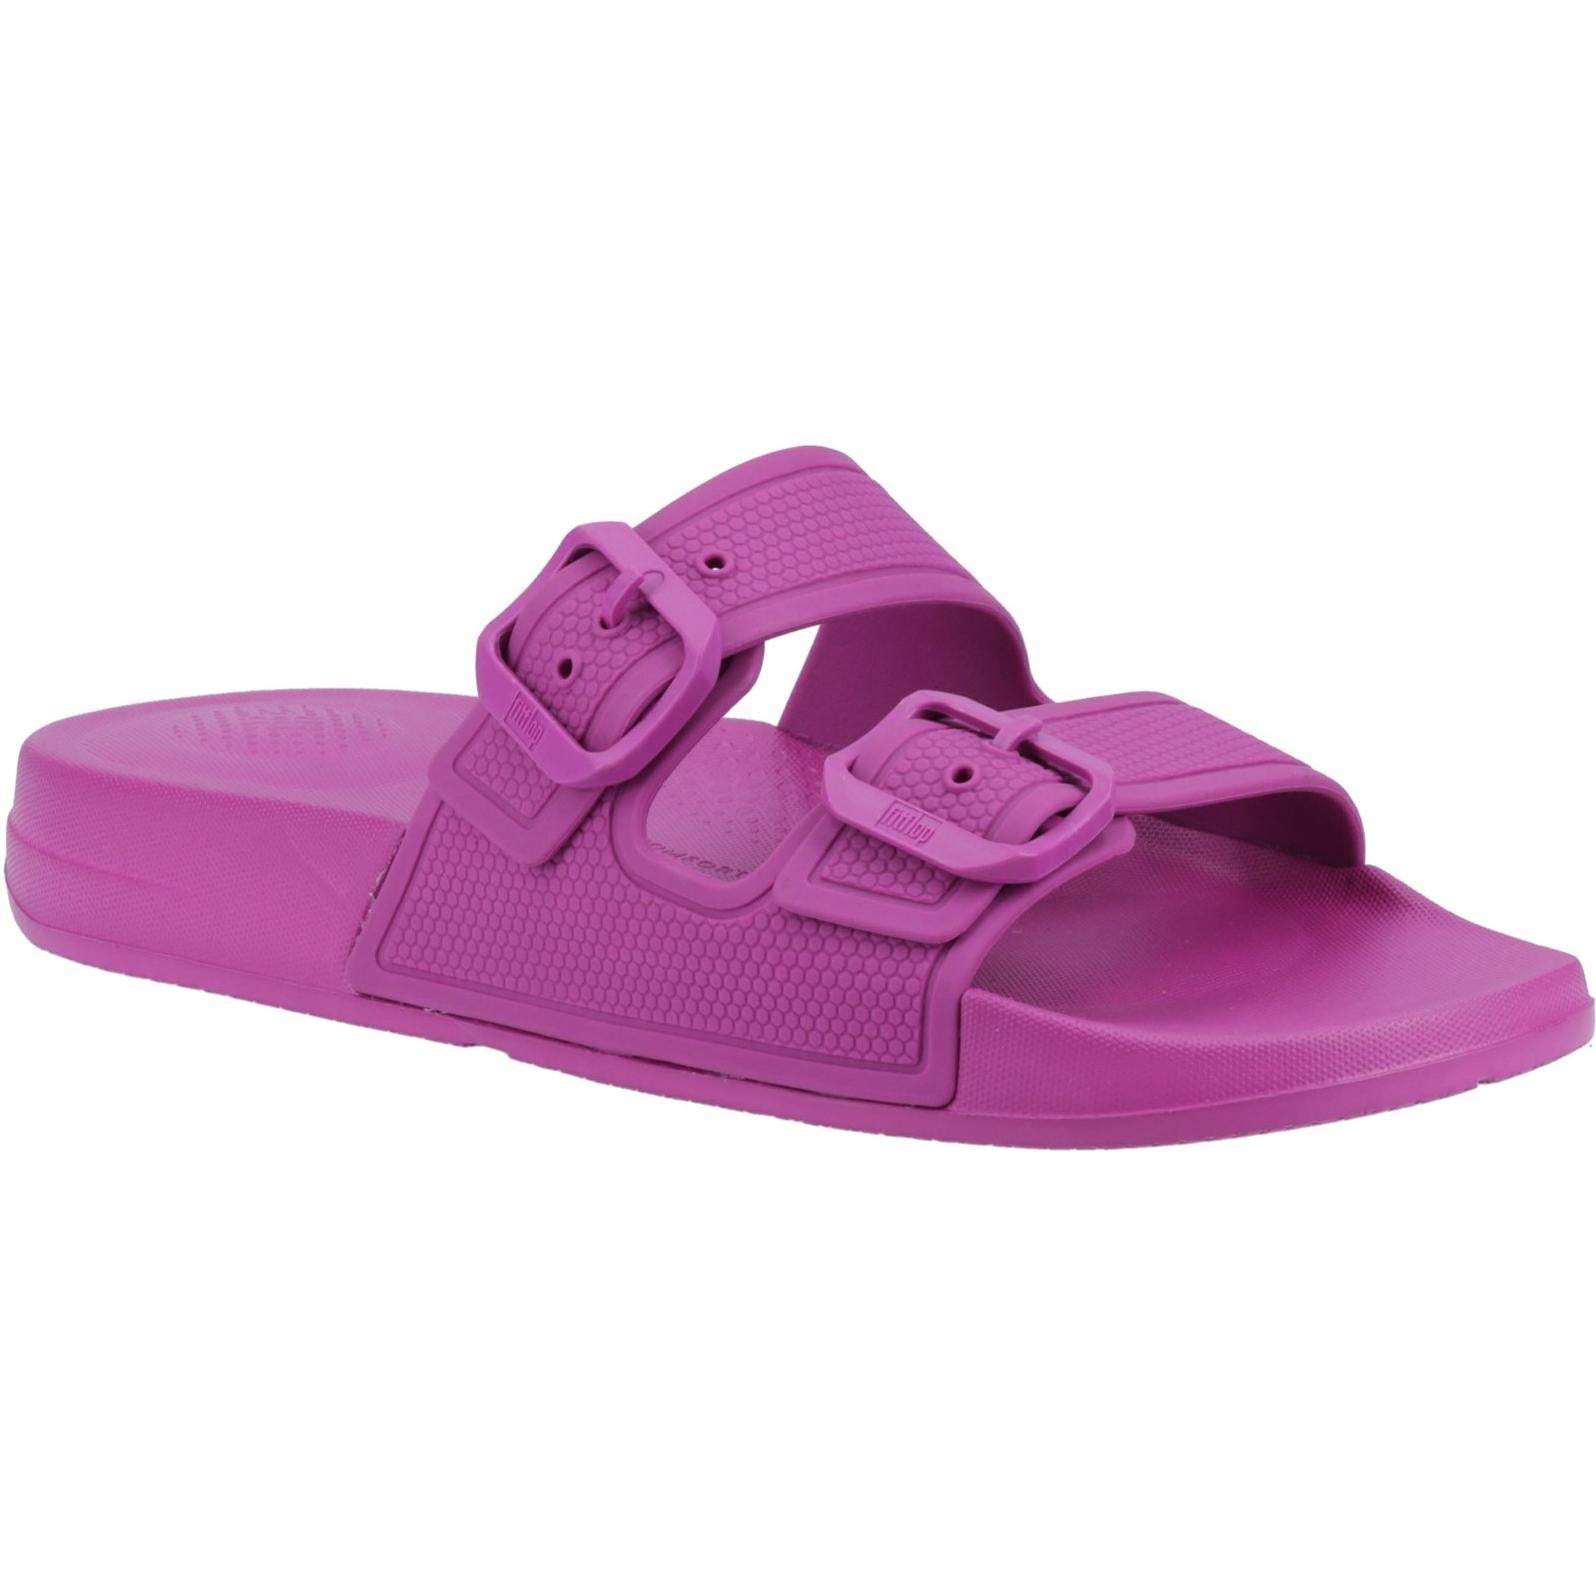 Fitflop iQUSHION Slides Sandals